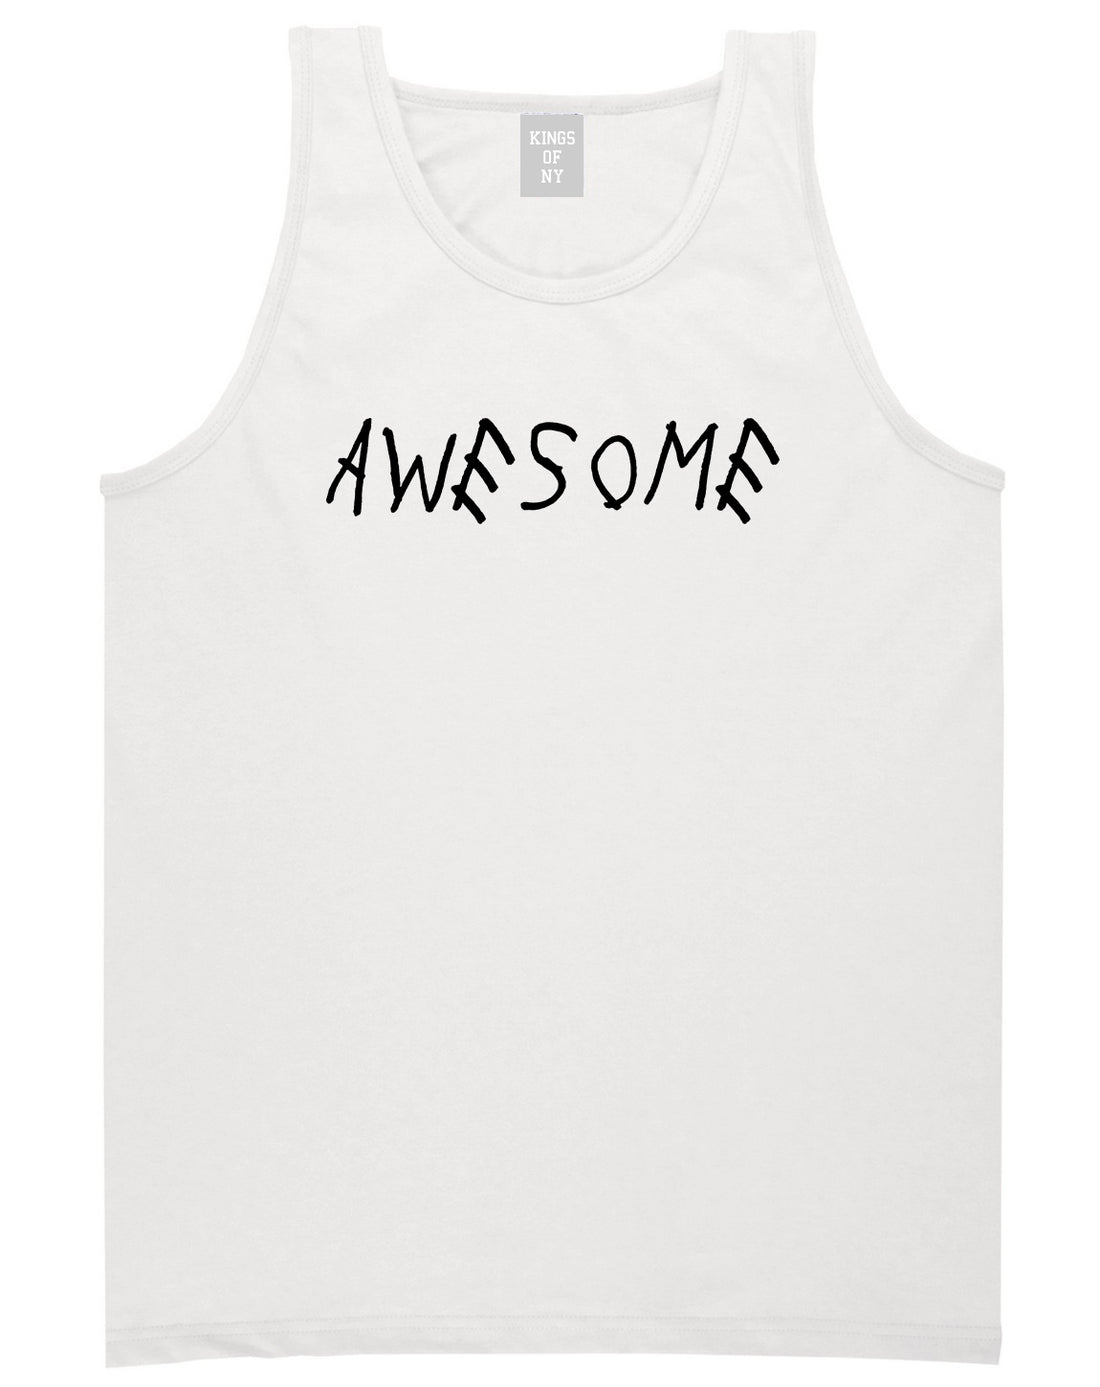 Awesome White Tank Top Shirt by Kings Of NY